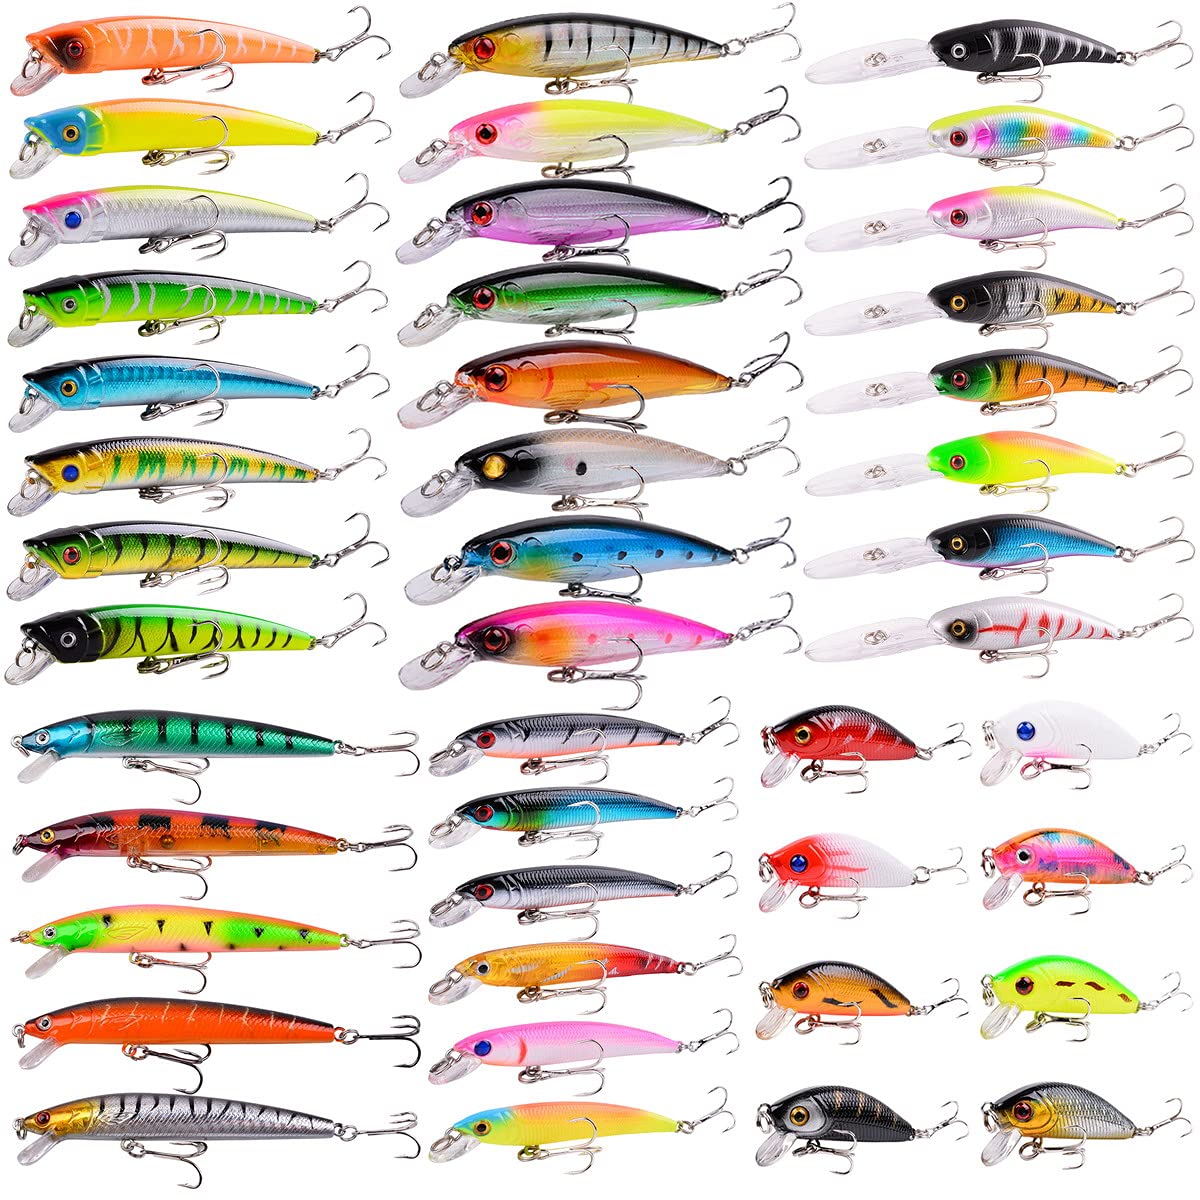 Aorace Fishing Lures Kit Mixed Including Minnow Popper Crank Baits